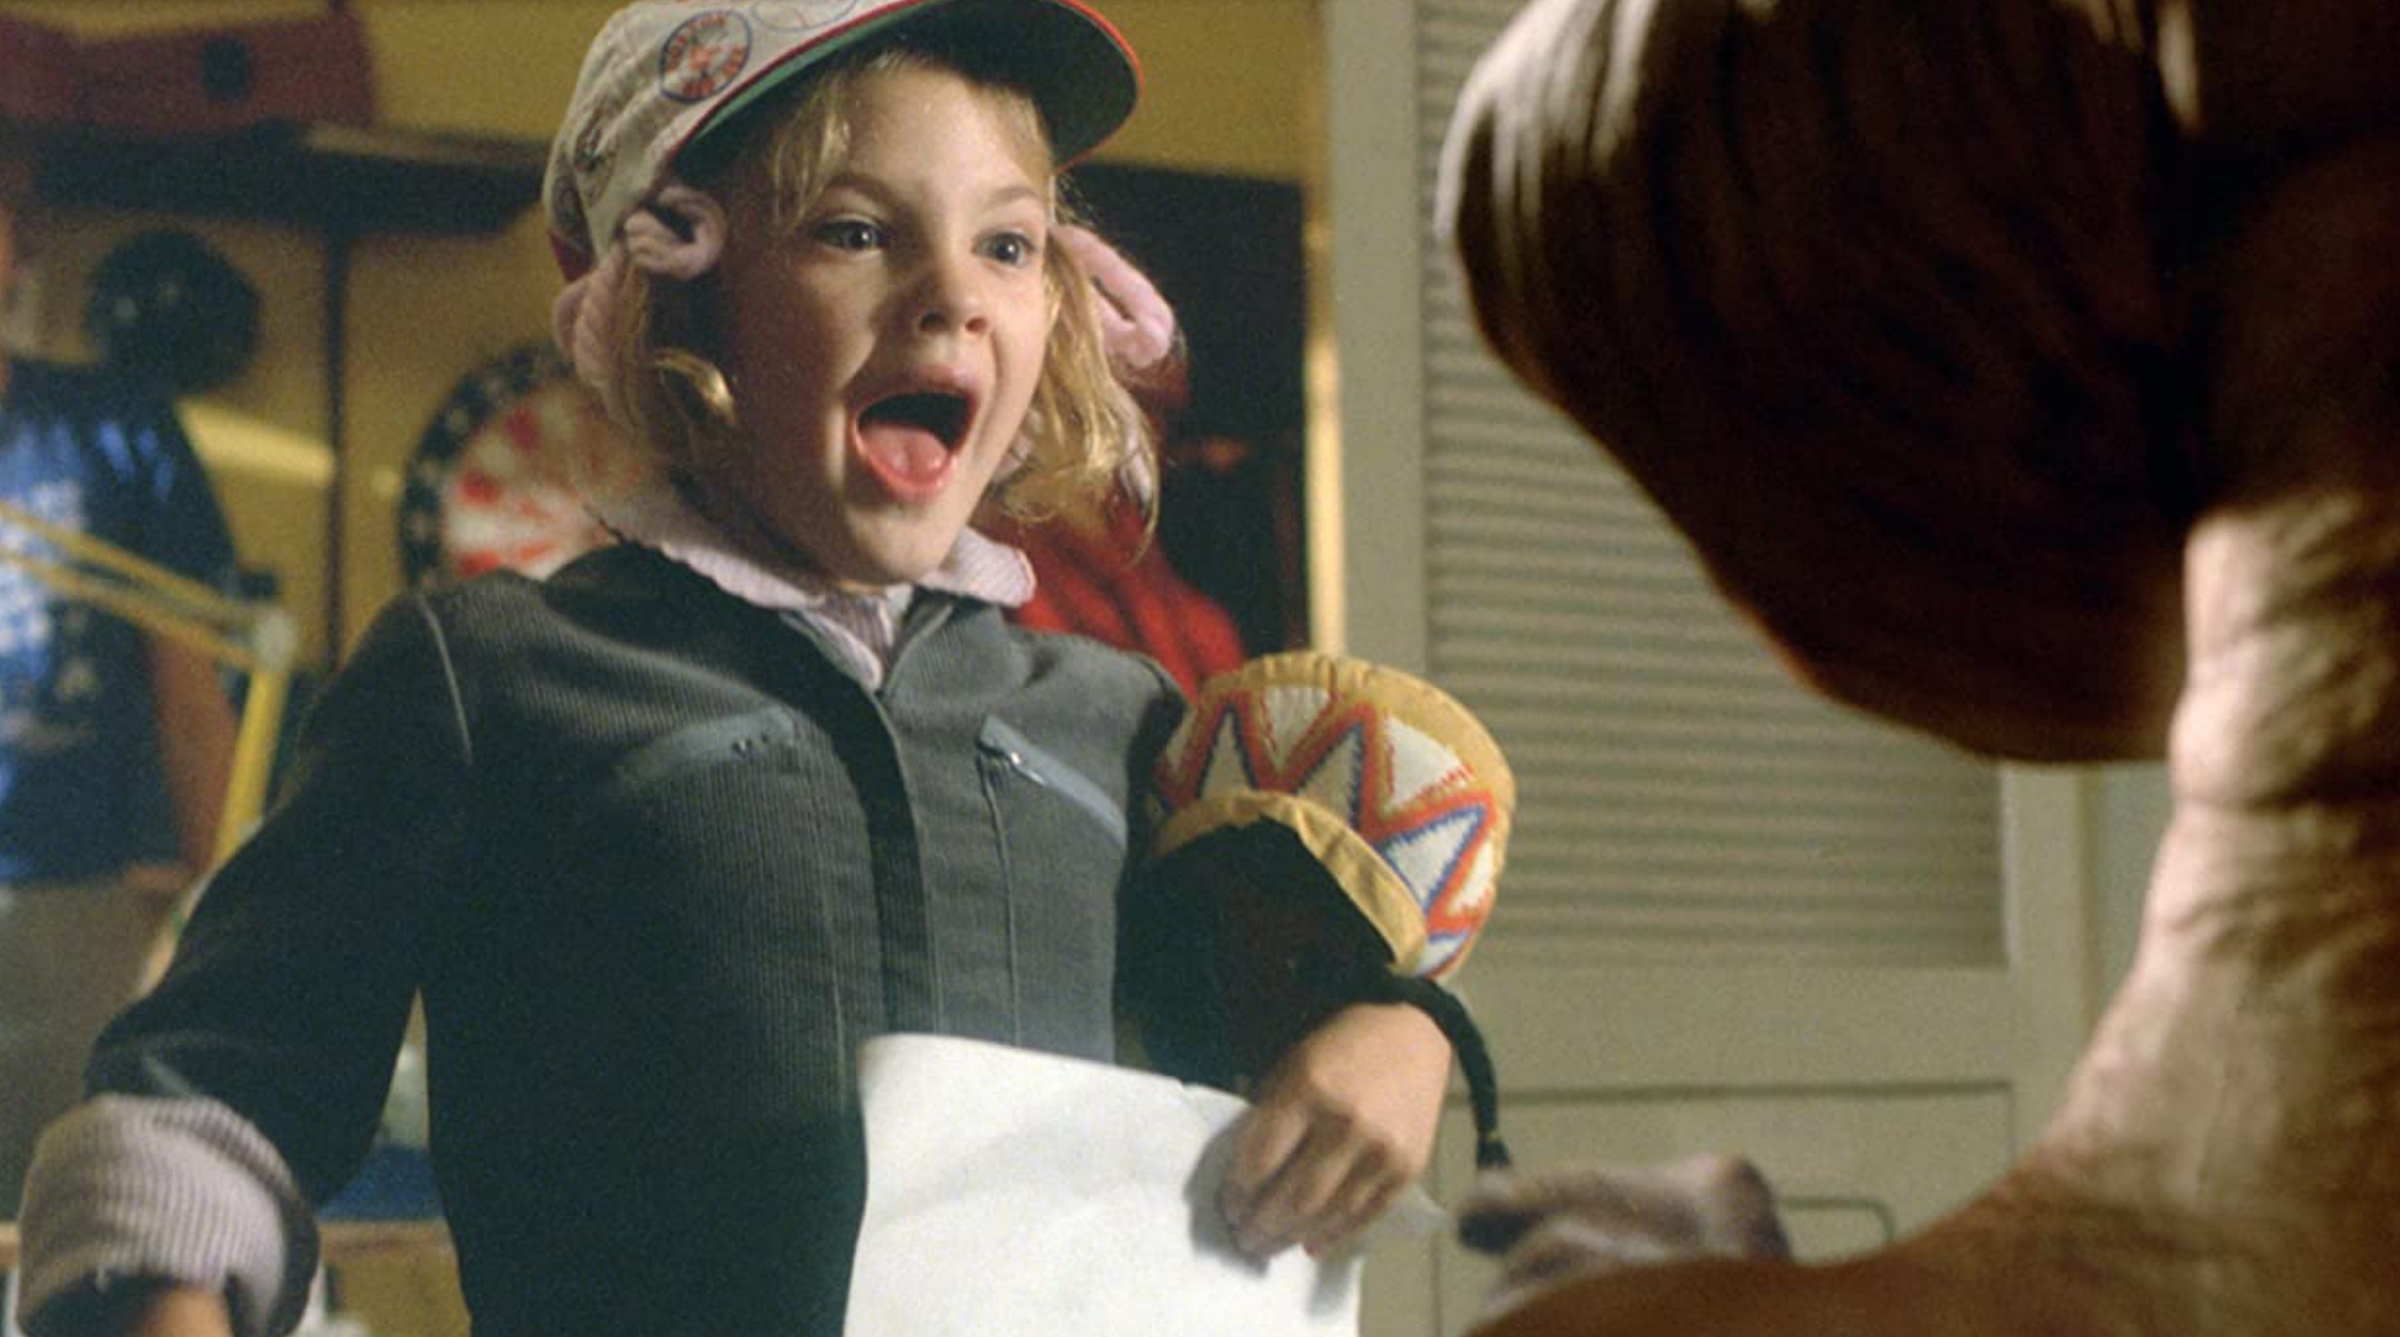 Drew Barrymore in “E.T. The Extra Terrestrial” (1982)